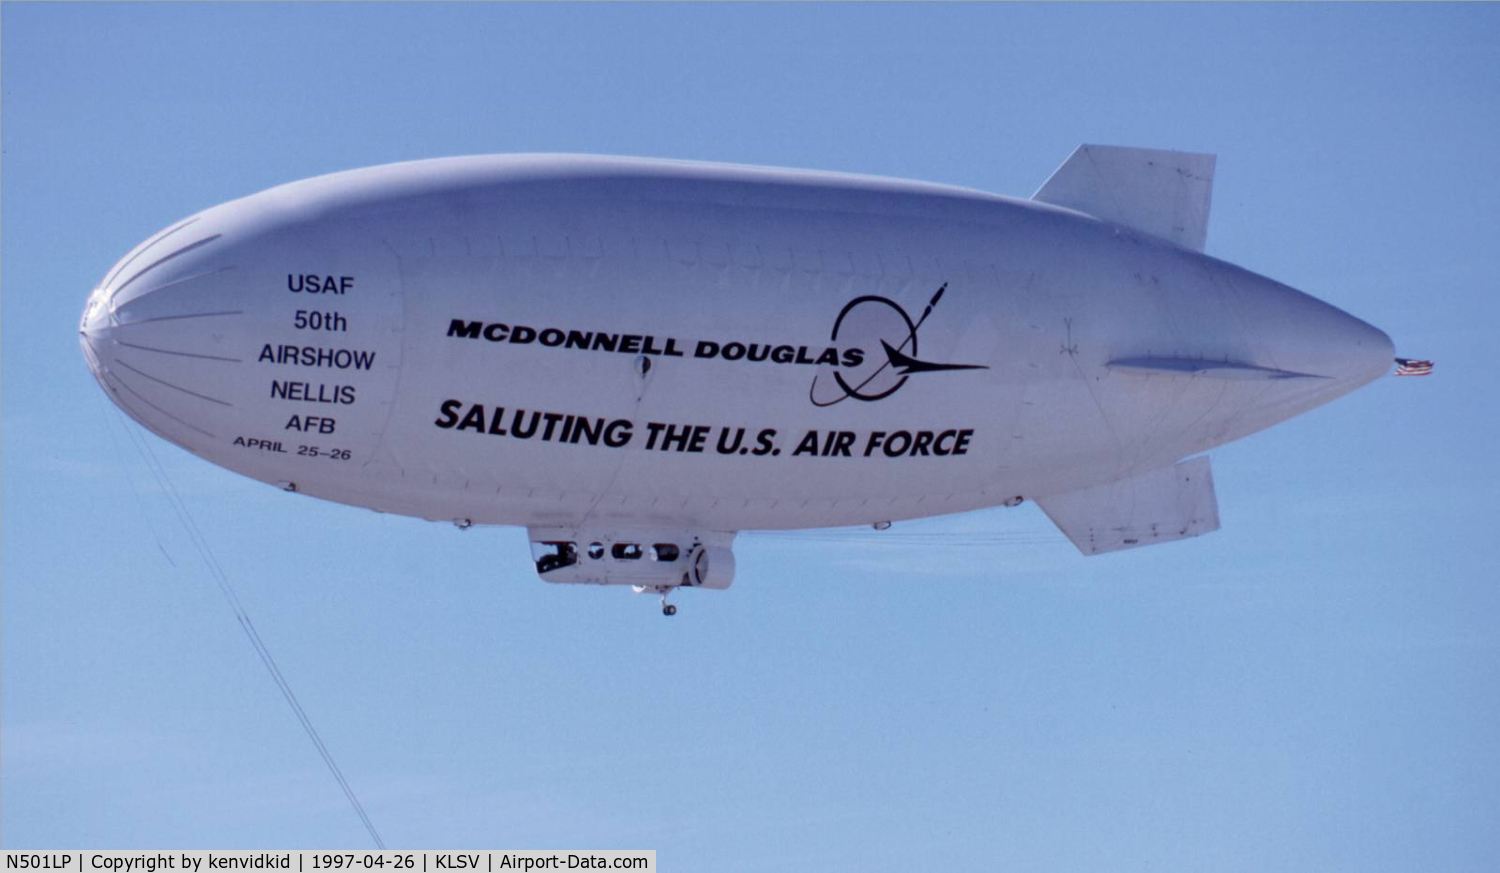 N501LP, Airship Industries Skyship 500 C/N 1214-04, At the 1997 50th Anniversary of the USAF air display, Nellis AFB.